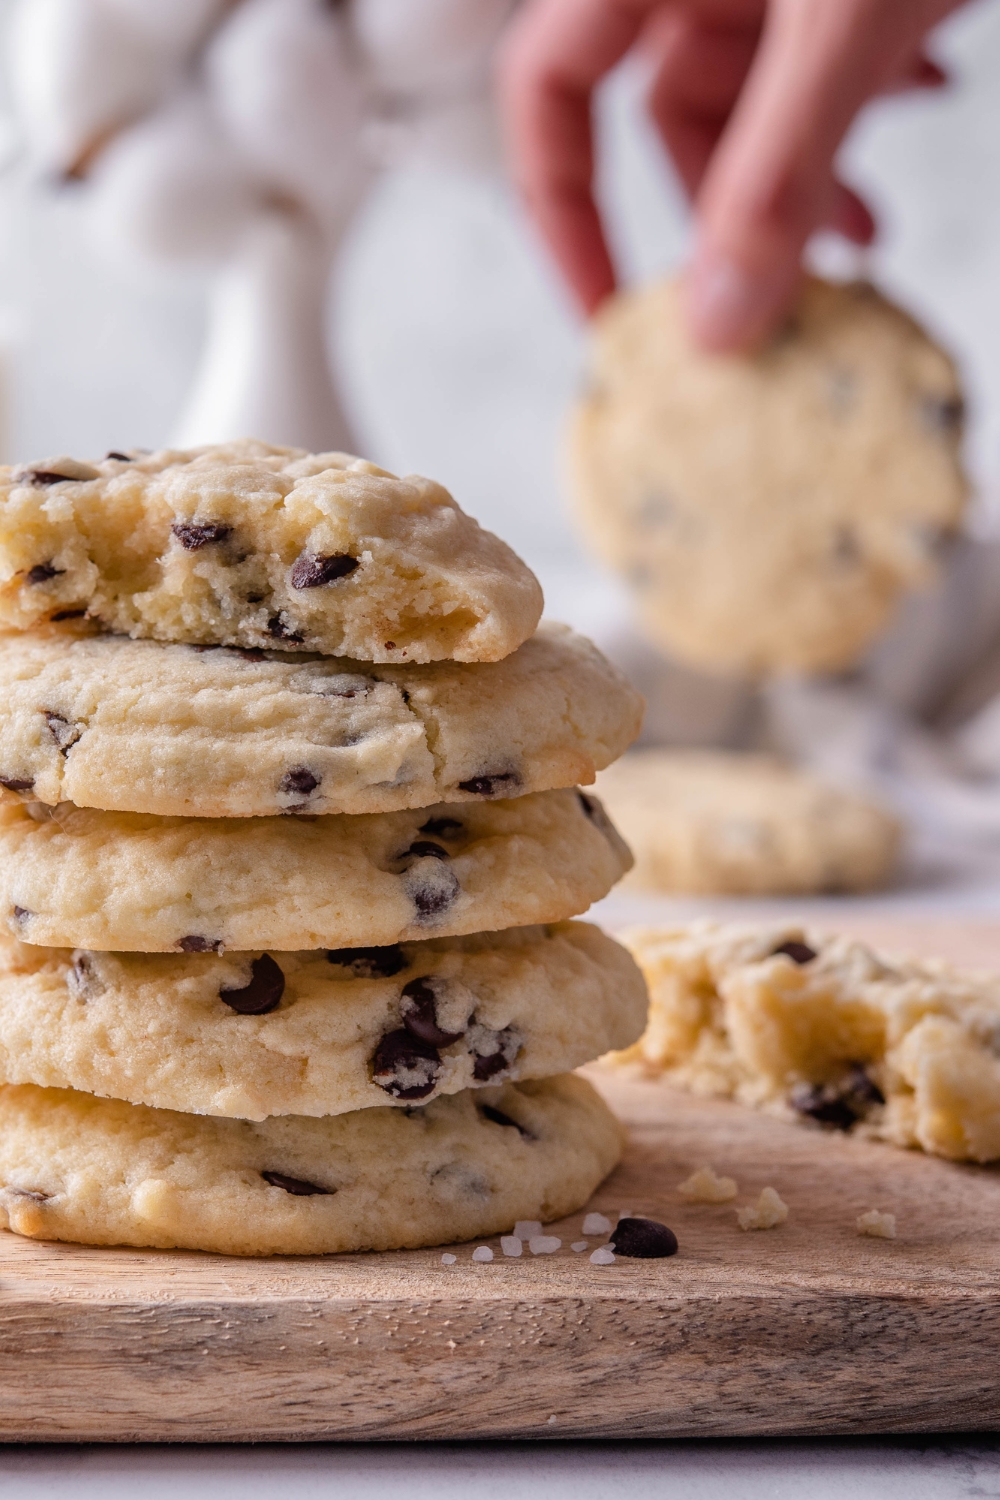 A stack of chocolate chip cookies with one cookie split in half on top. A hand is holding another chocolate chip cookie is in the background.